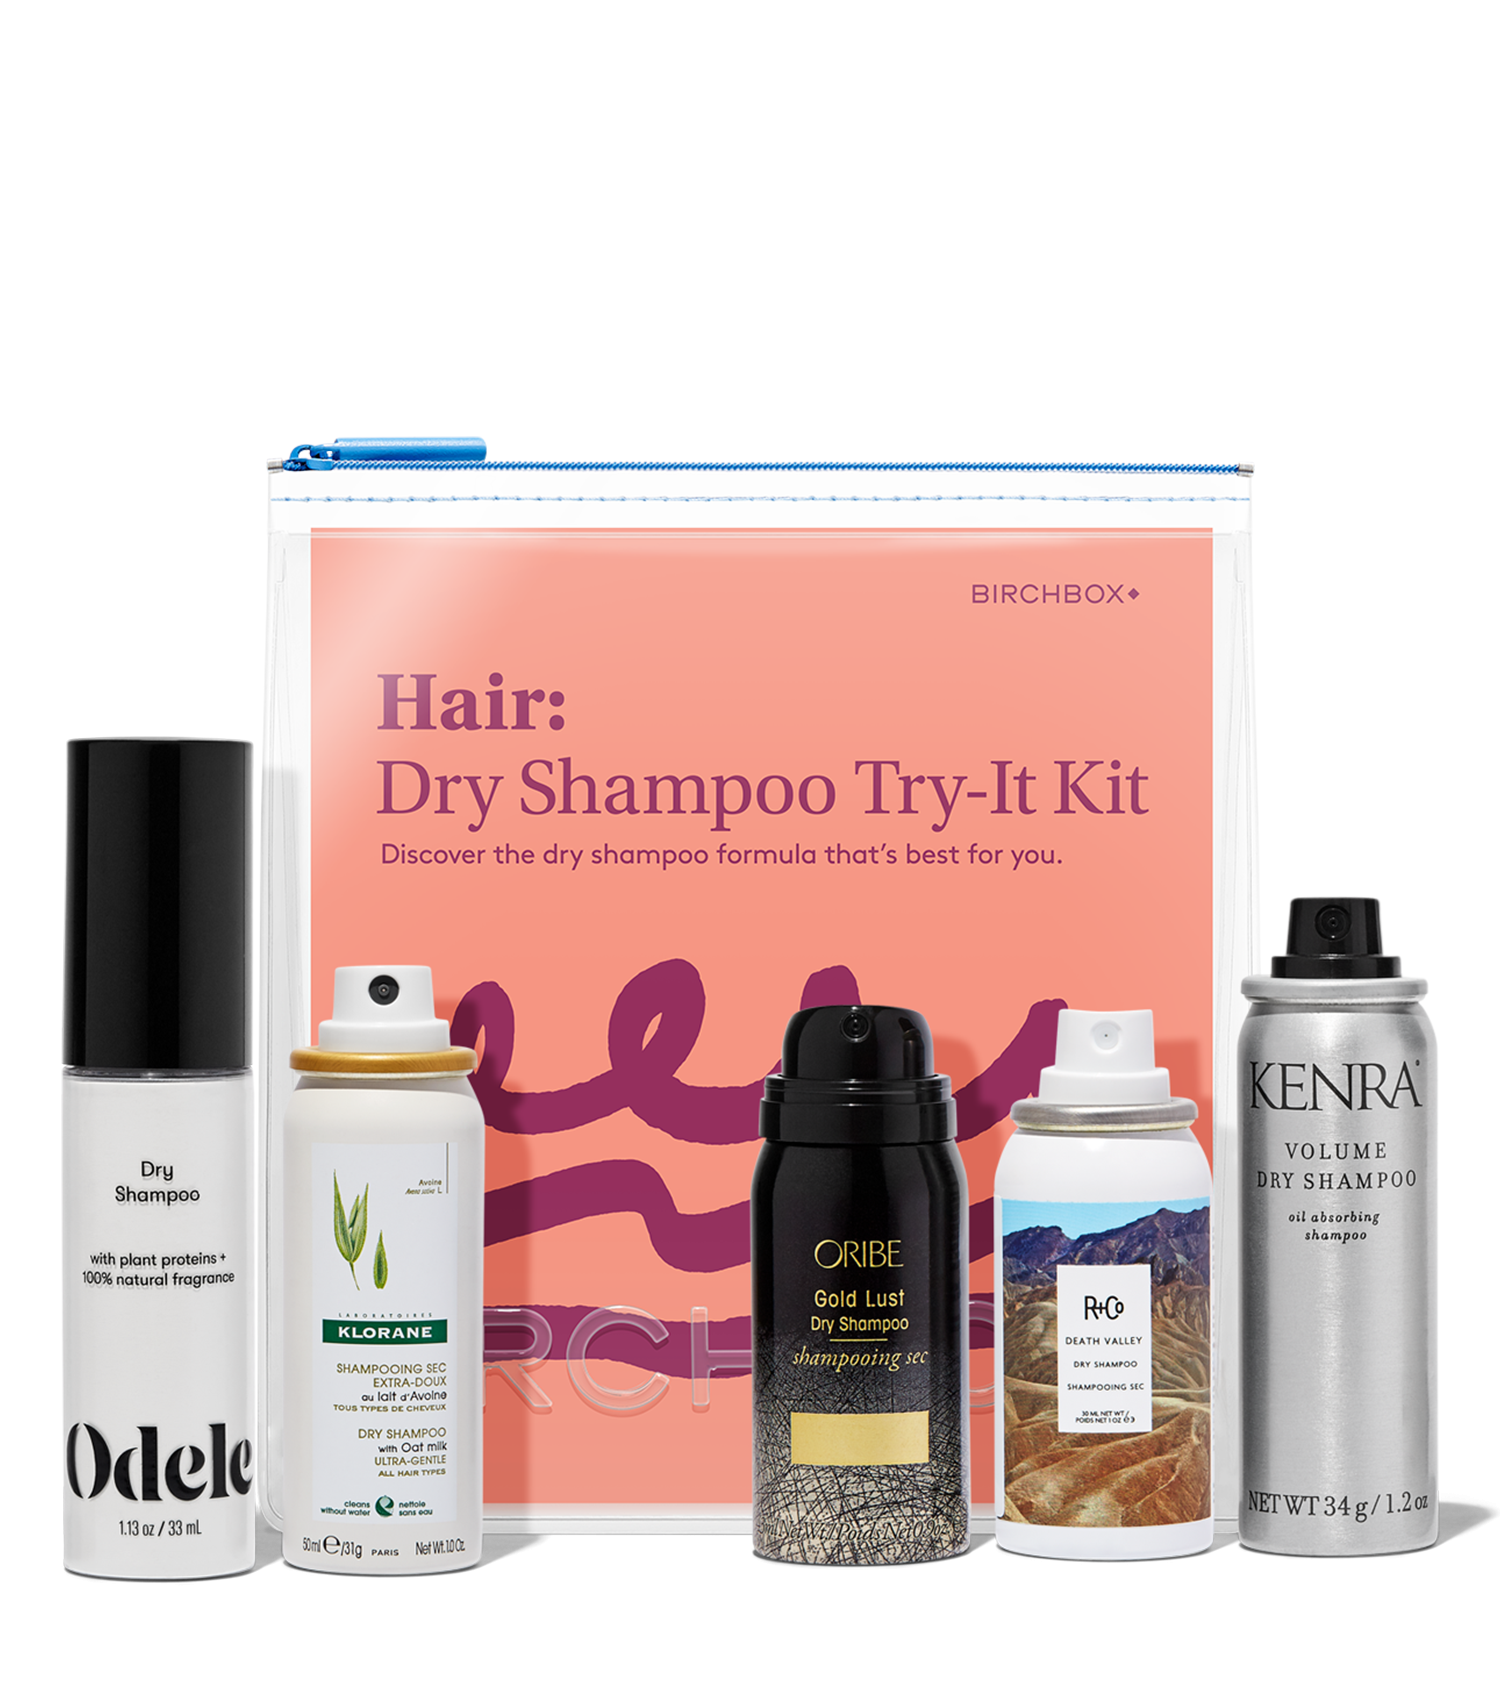 The Dry Shampoo Try-It Kit